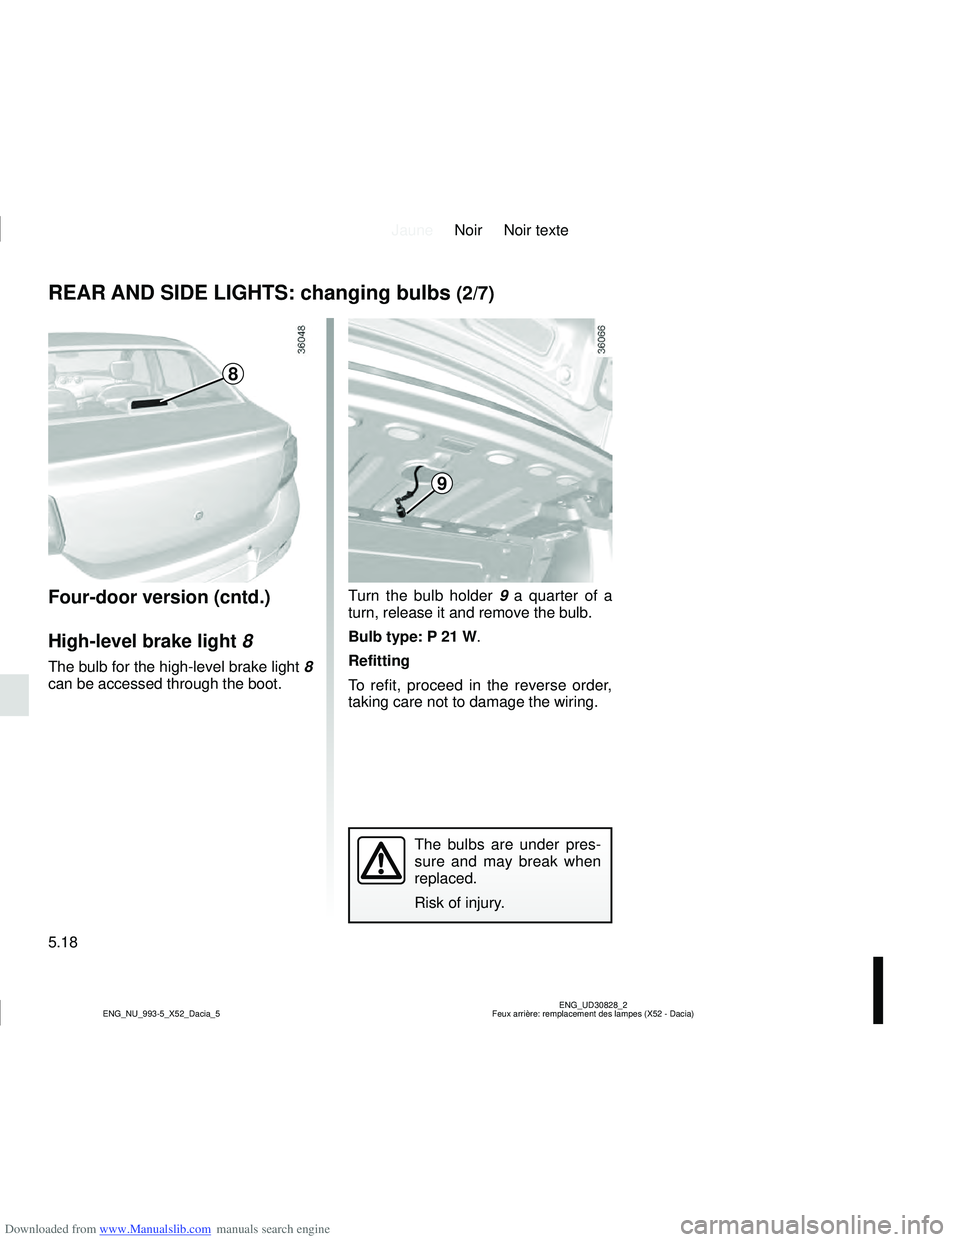 DACIA SANDERO 2019  Owners Manual Downloaded from www.Manualslib.com manuals search engine JauneNoir Noir texte
5.18
ENG_UD30828_2
Feux arrière: remplacement des lampes (X52 - Dacia)
ENG_NU_993-5_X52_Dacia_5
REAR AND SIDE LIGHTS: cha